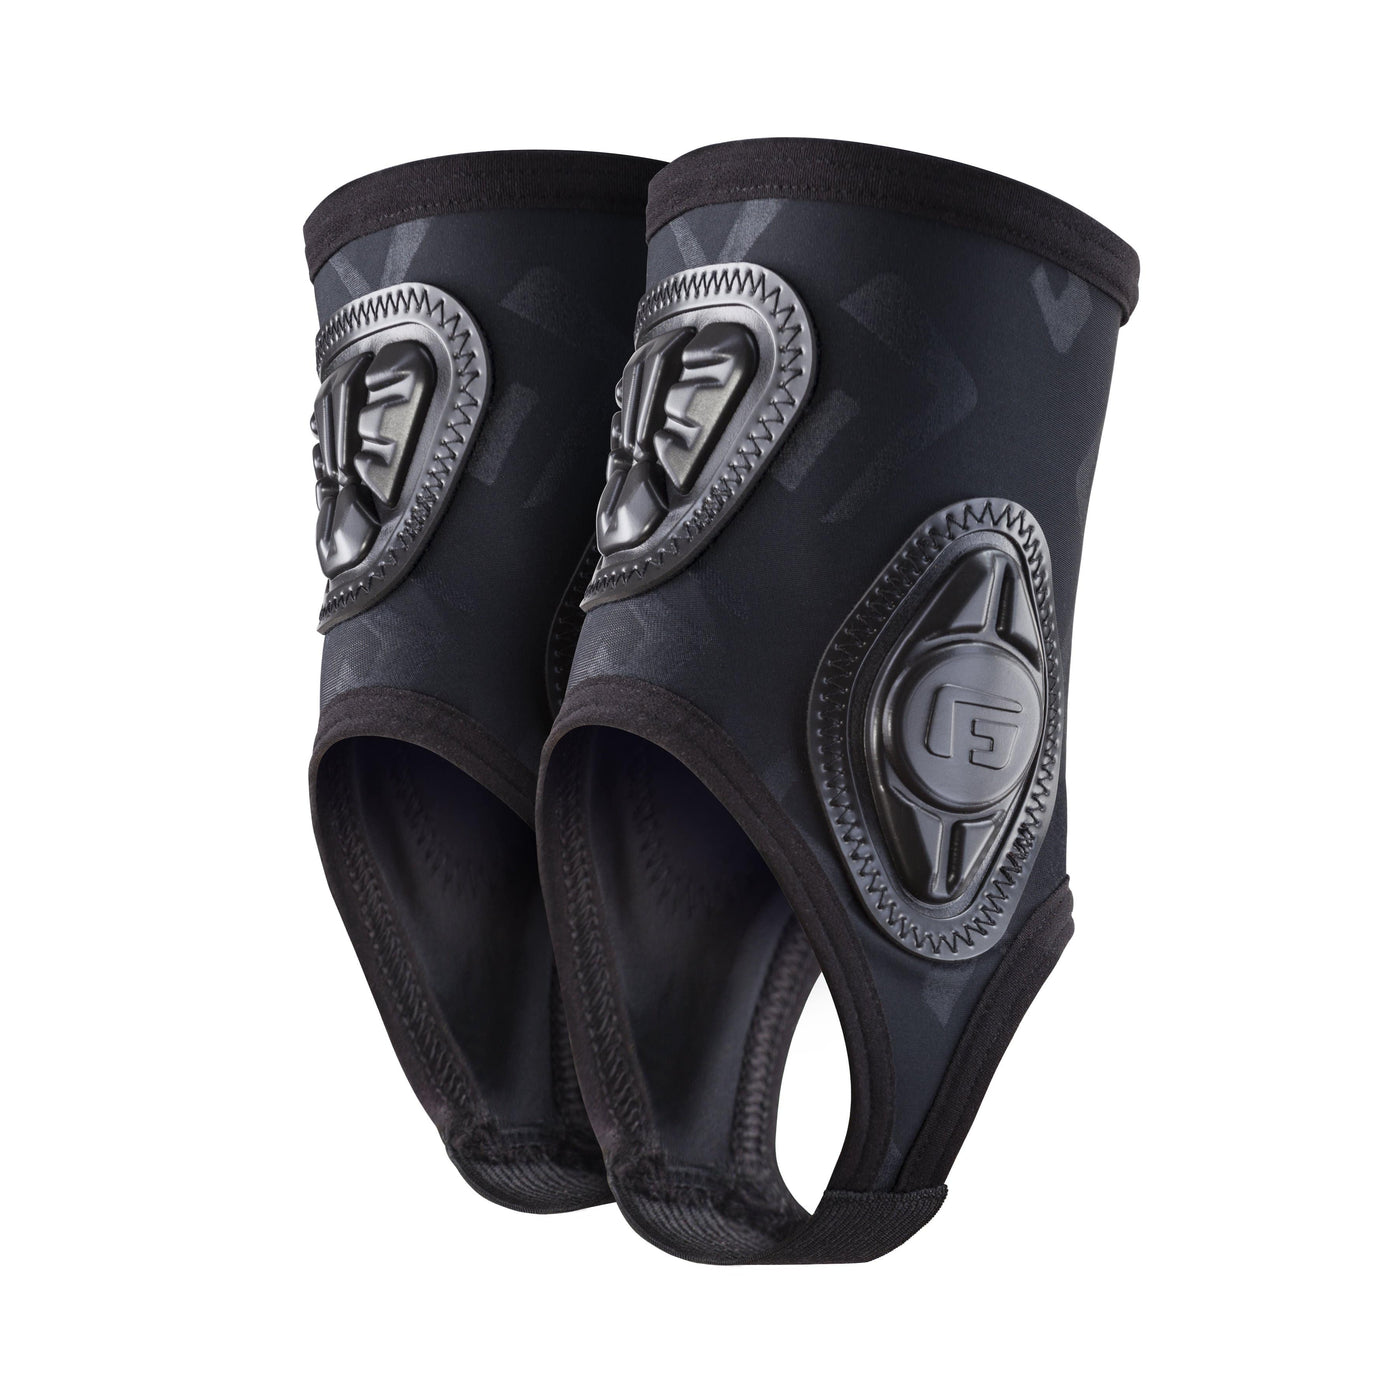 G-Form Ankle Guards Pro-X - Black 8Lines Shop - Fast Shipping